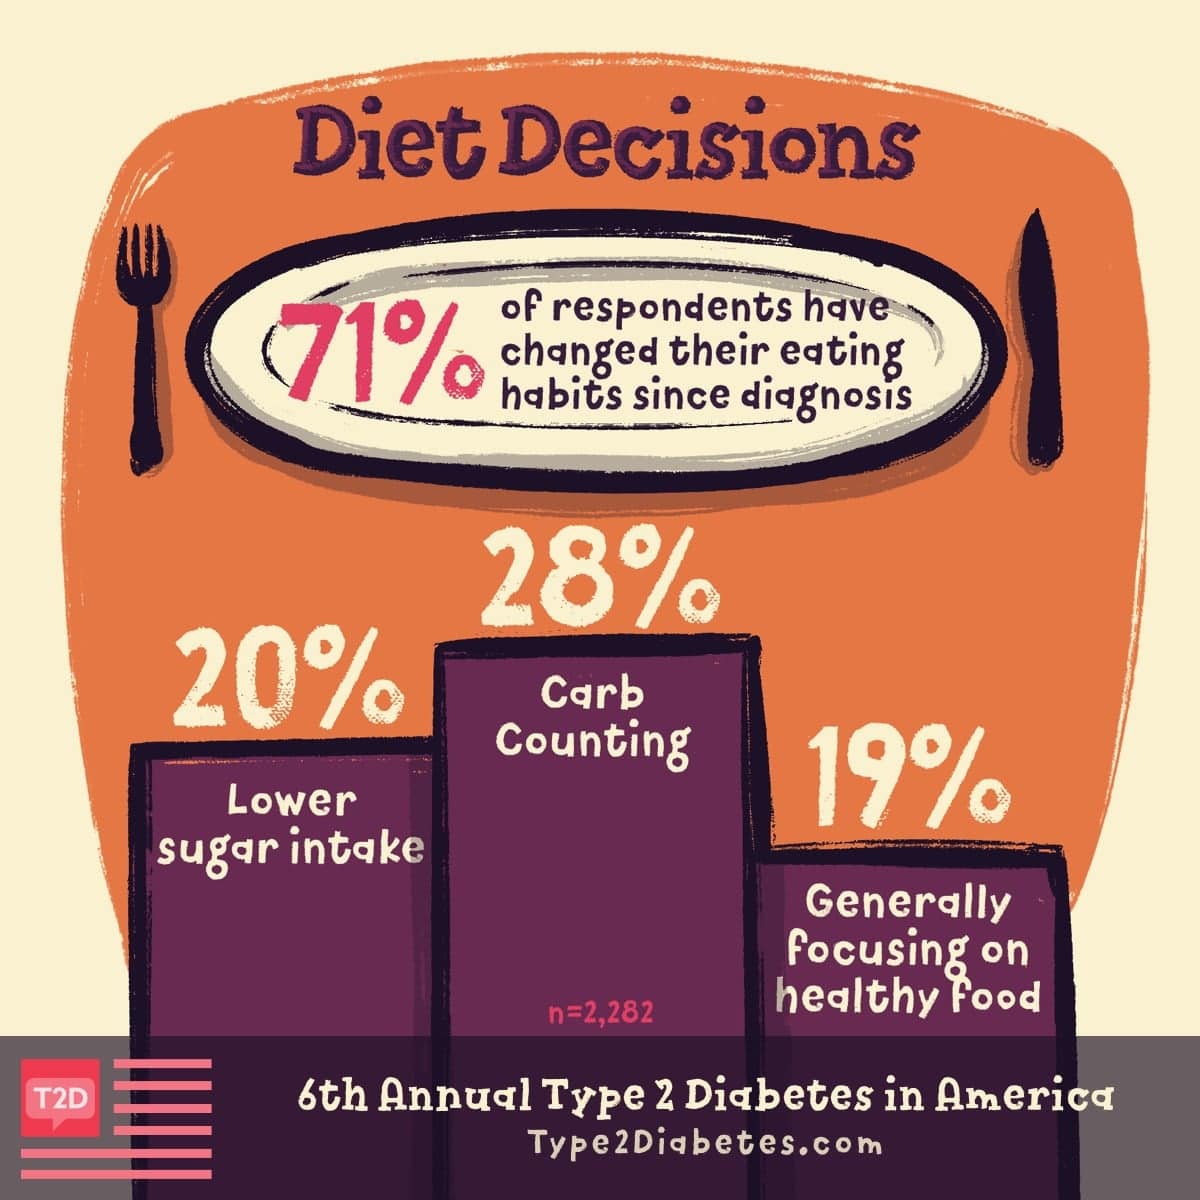 71% of survey respondents have changed their eating habits since their diagnosis.